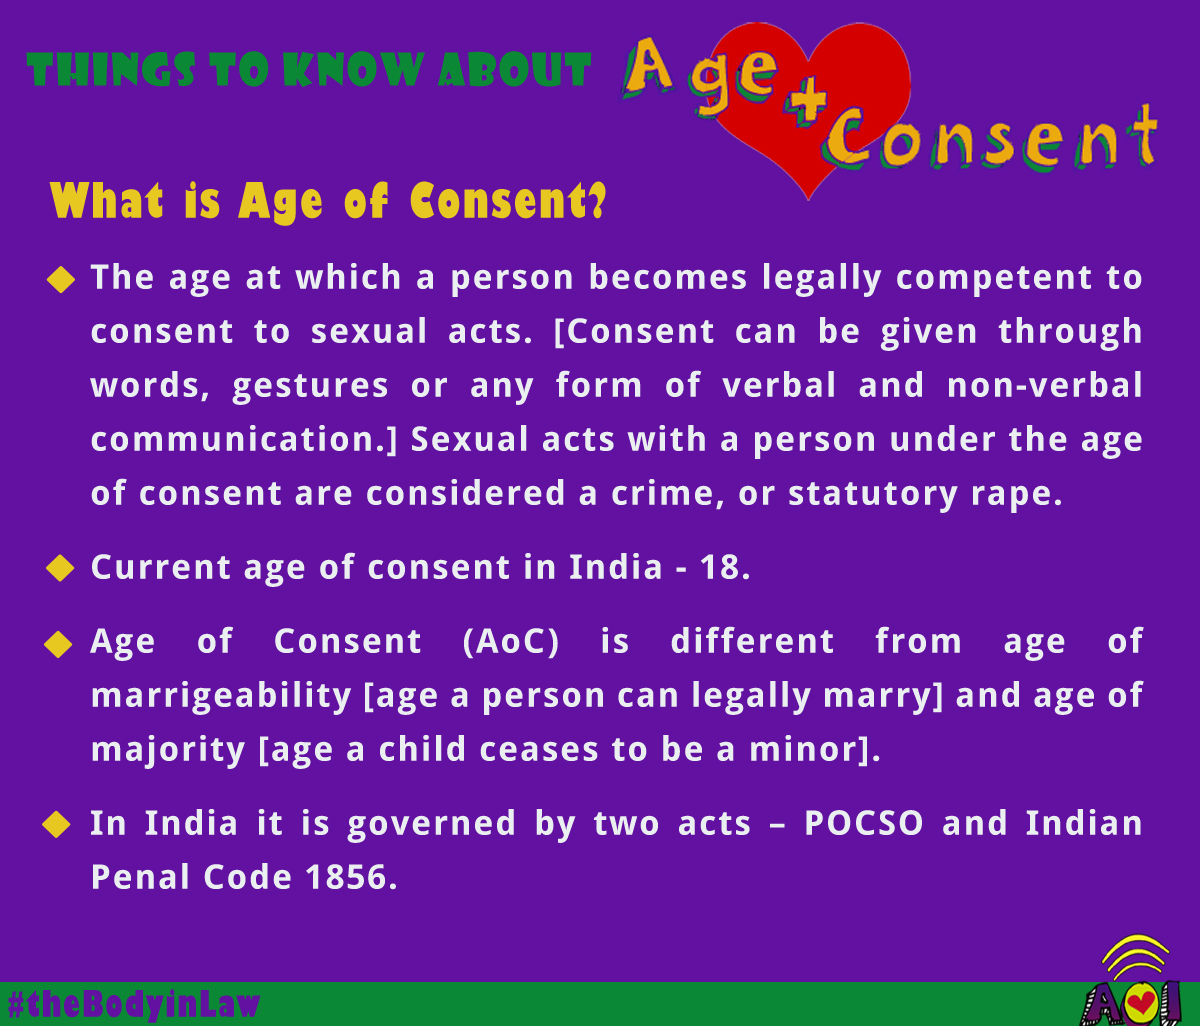 Age of Consent and Difference in Age